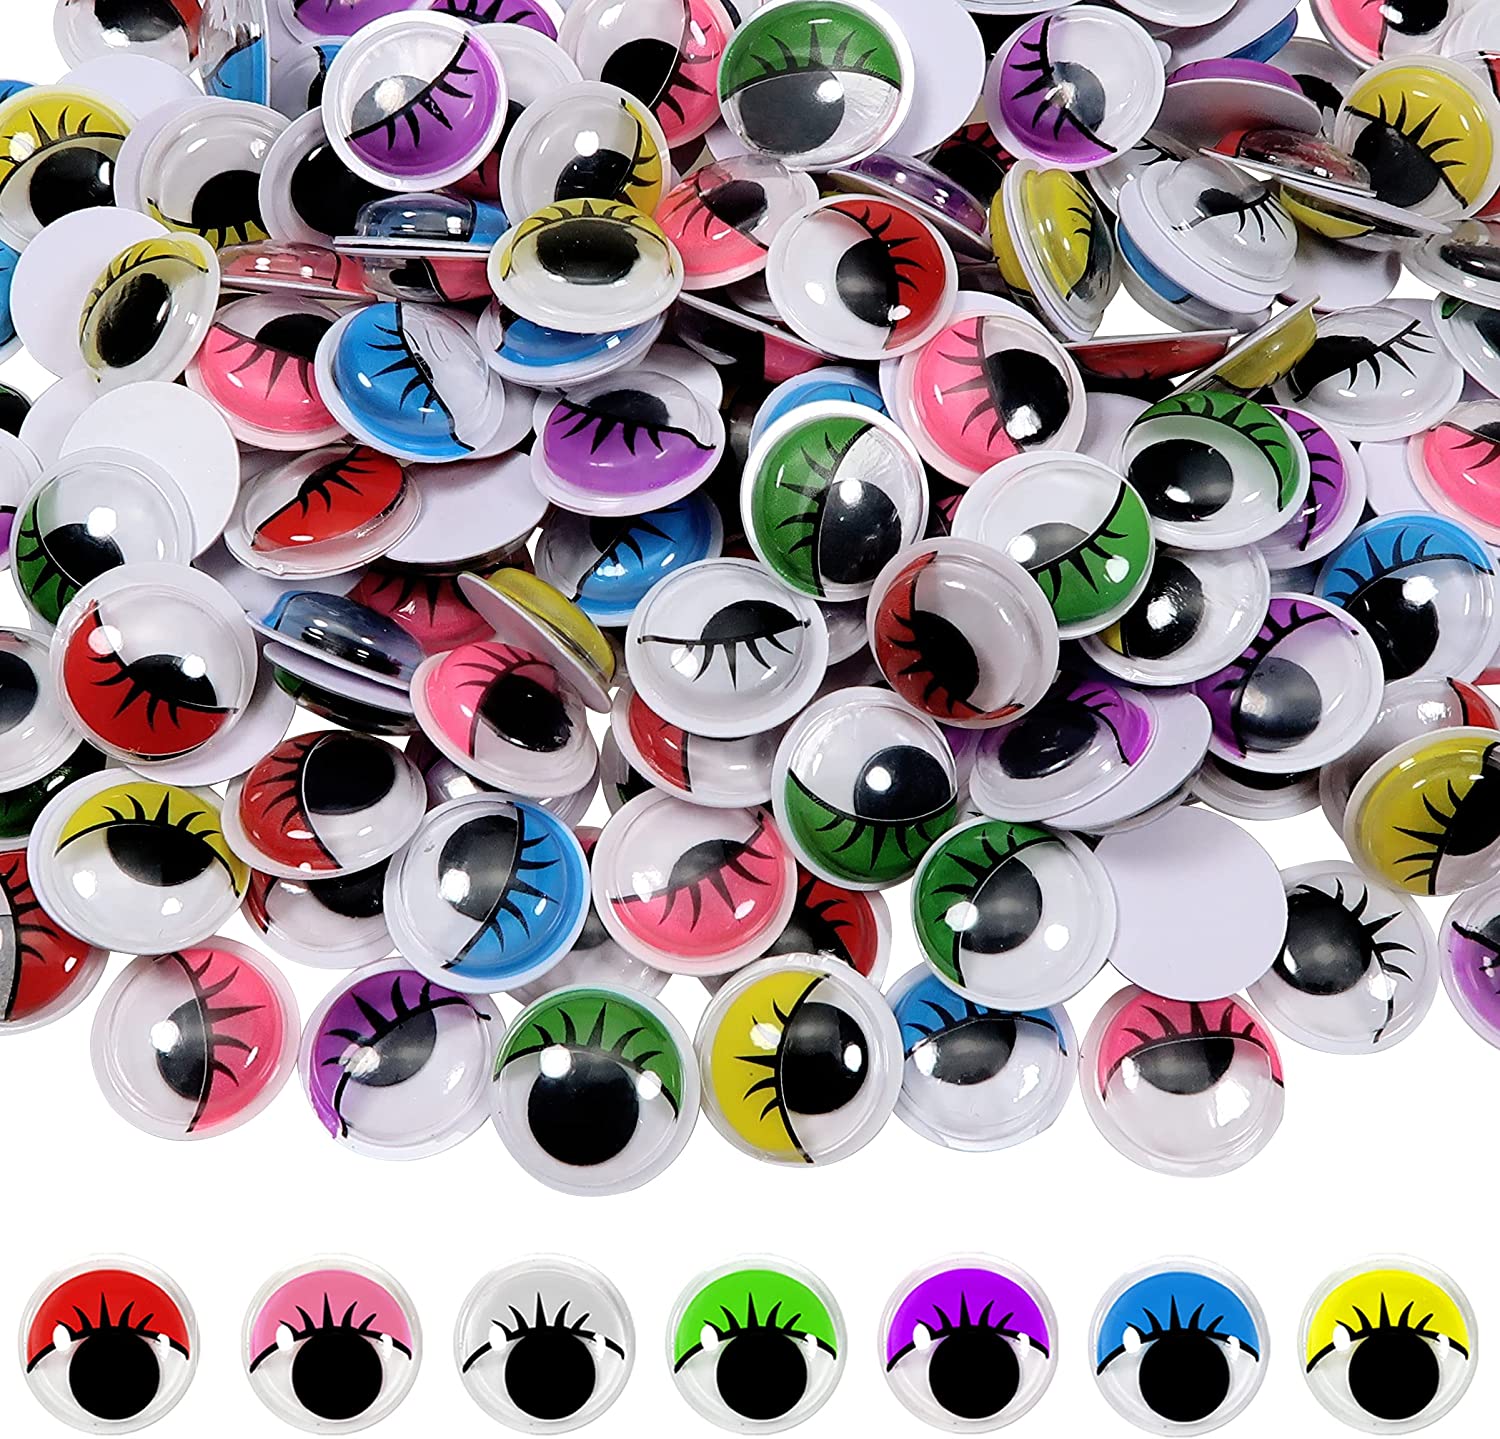 Yirtree 50pcs 15mm Plastic Wiggle Eyes with Eyelashes Googly Eyes Self  Adhesive Assorted Colors Craft Stickers Eyes for DIY Arts Scrapbooking